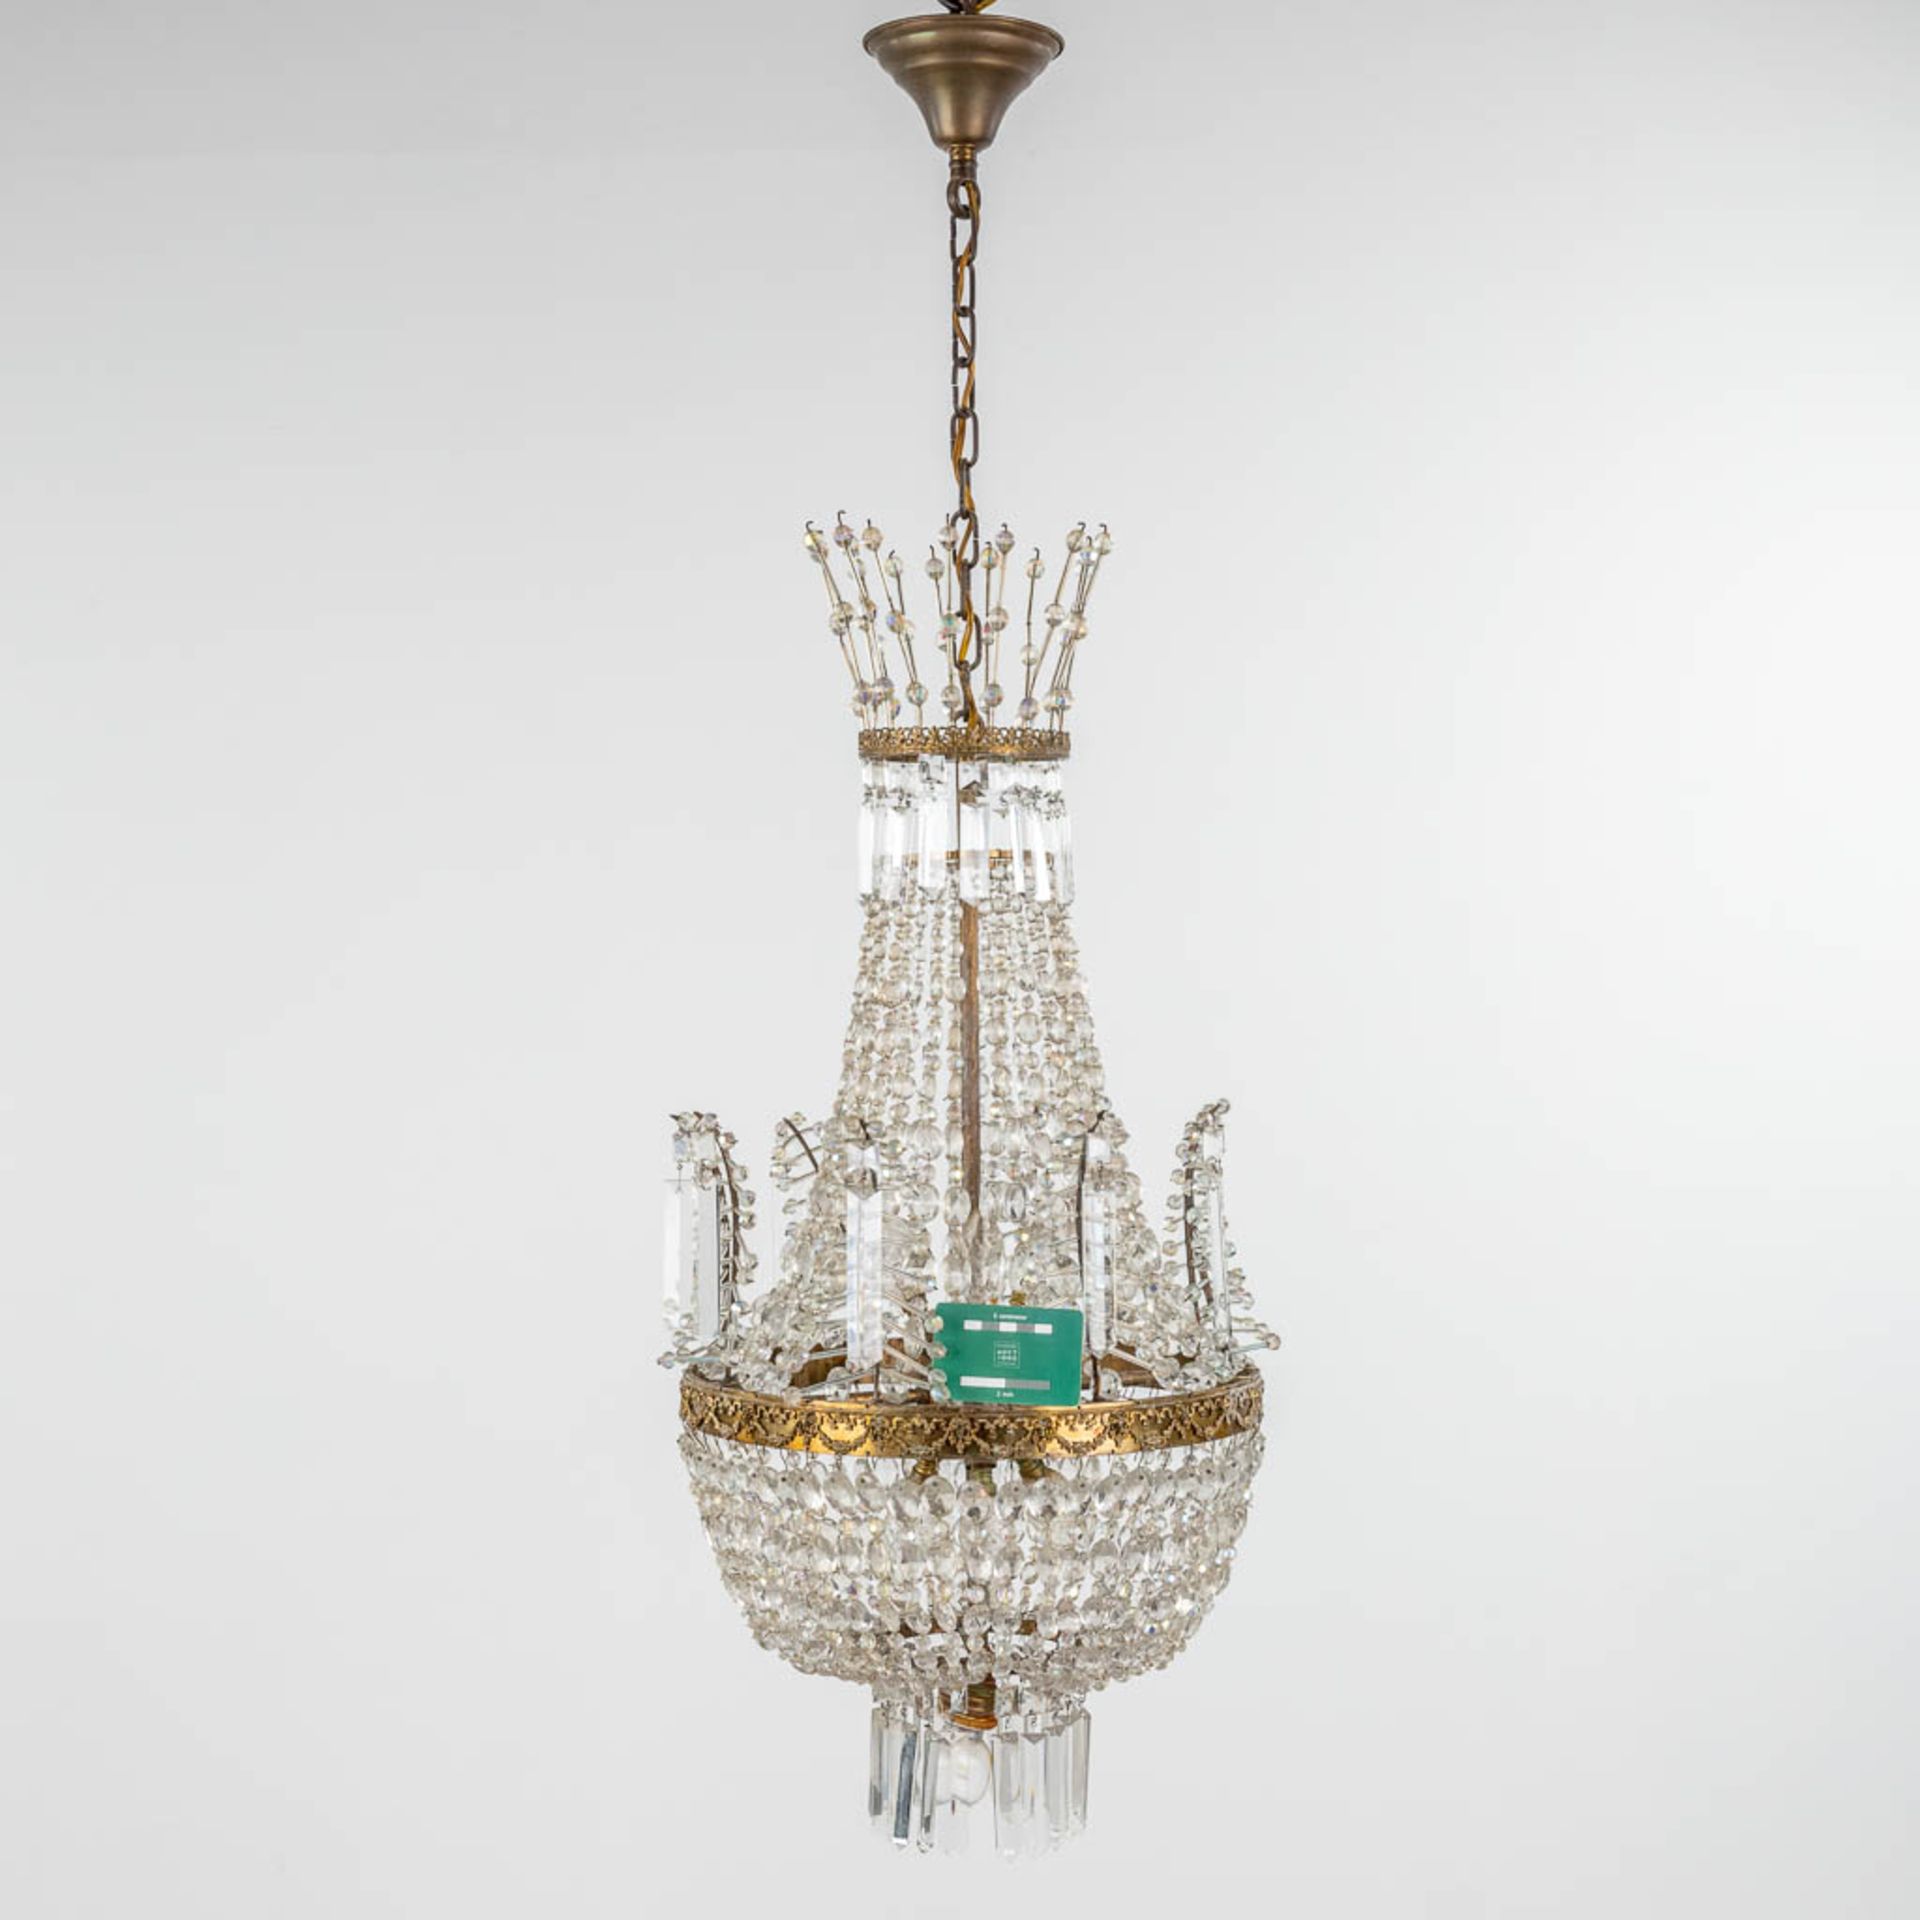 A chandelier 'Sac A Perles' decorated with tiny ram's heads. 20th century. (H: 83 x D: 42 cm) - Image 2 of 10